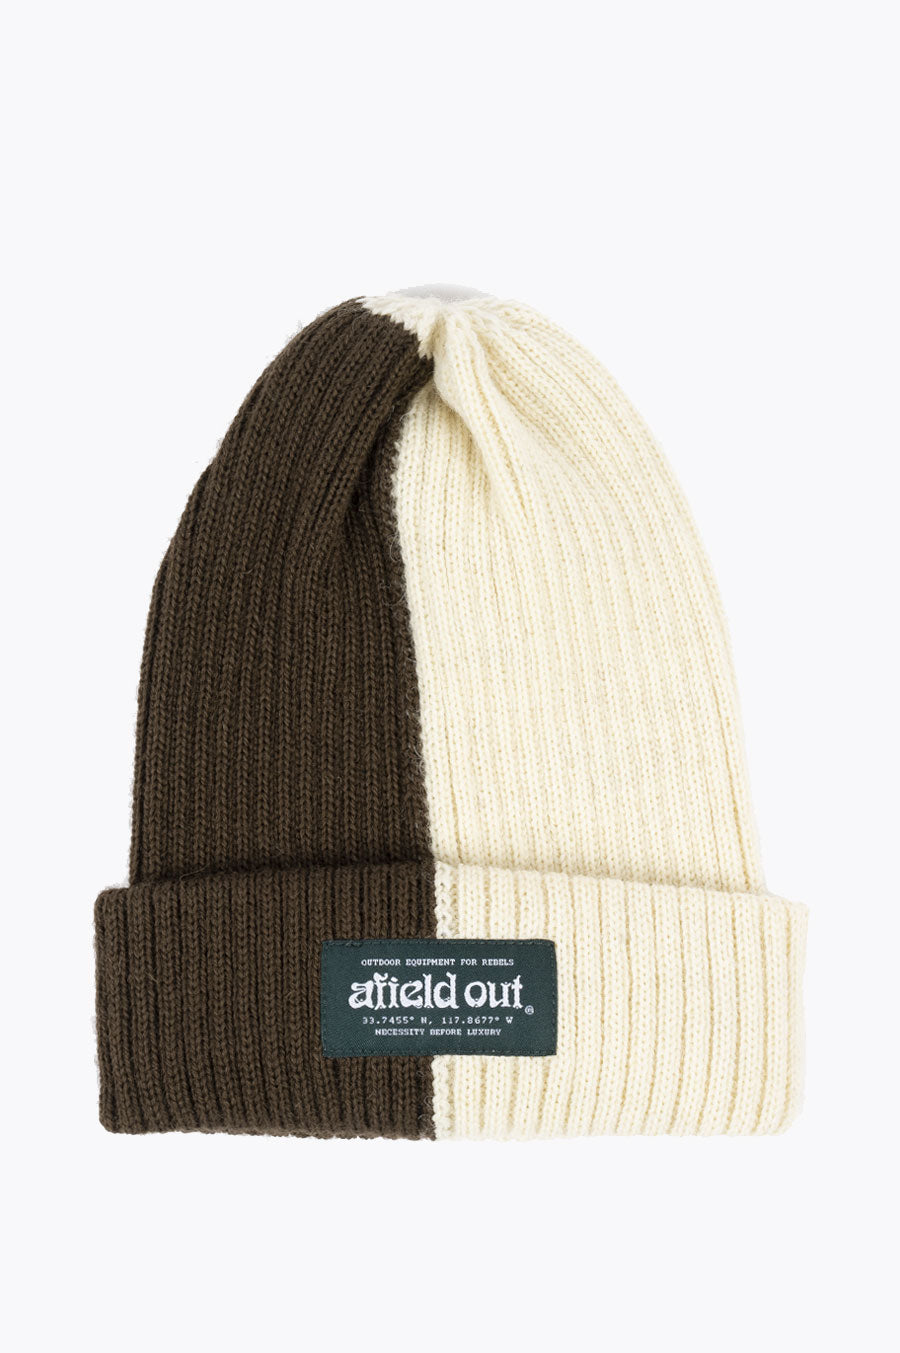 AFIELD OUT TWO TONE WATCH CAP BROWN CREAM